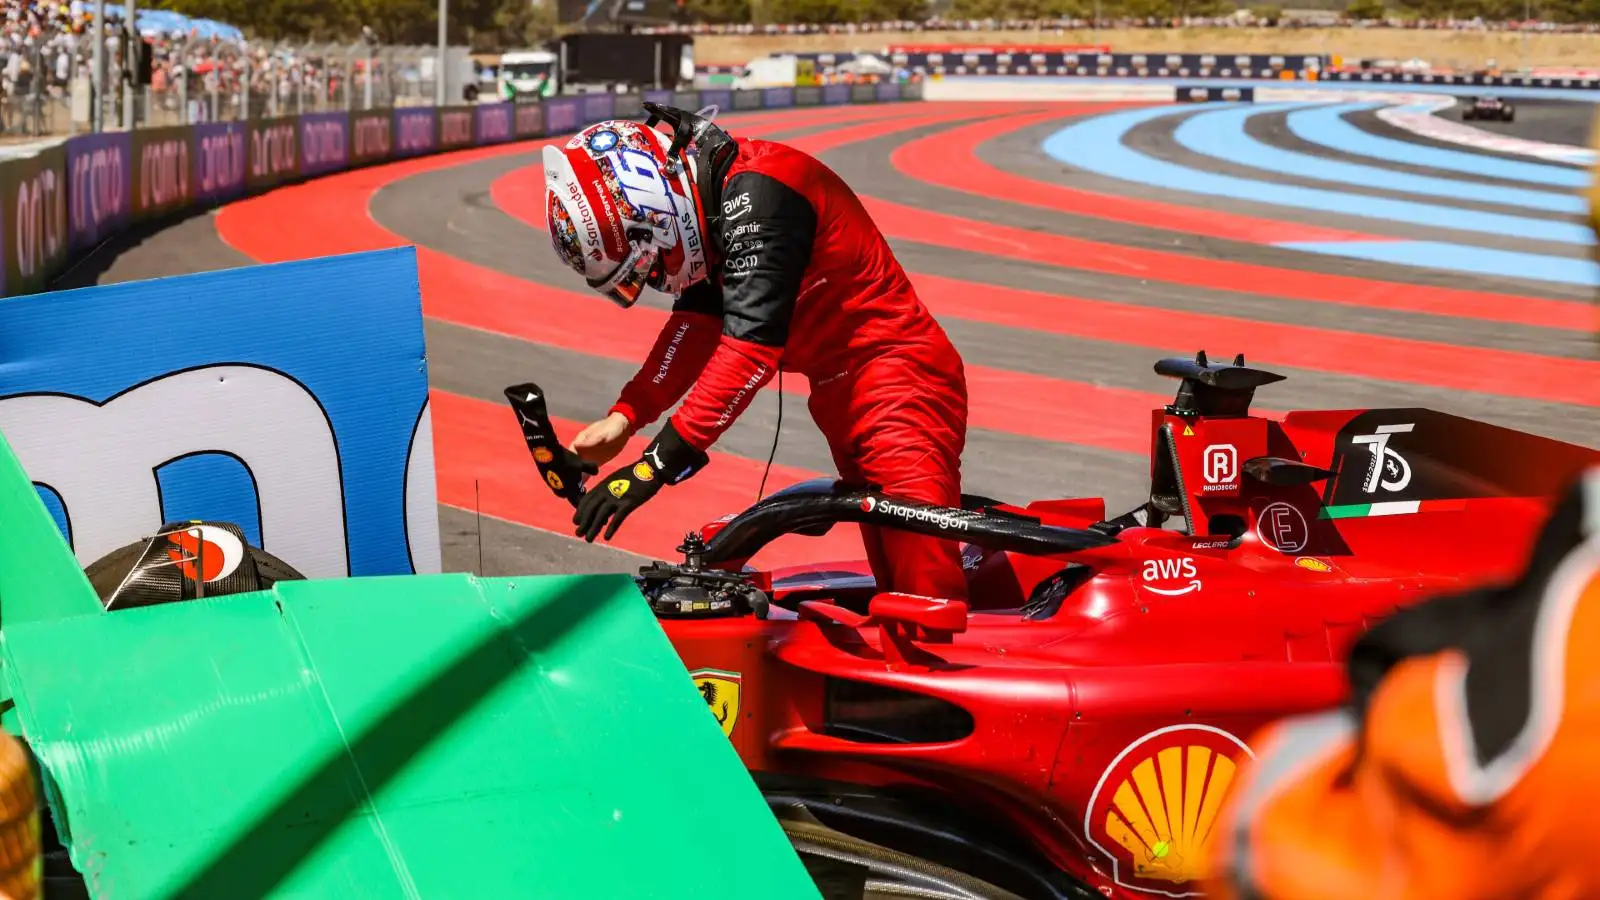 Charles Leclerc removes the steering wheel from his Ferrari after crashing. Paul Ricard July 2022.